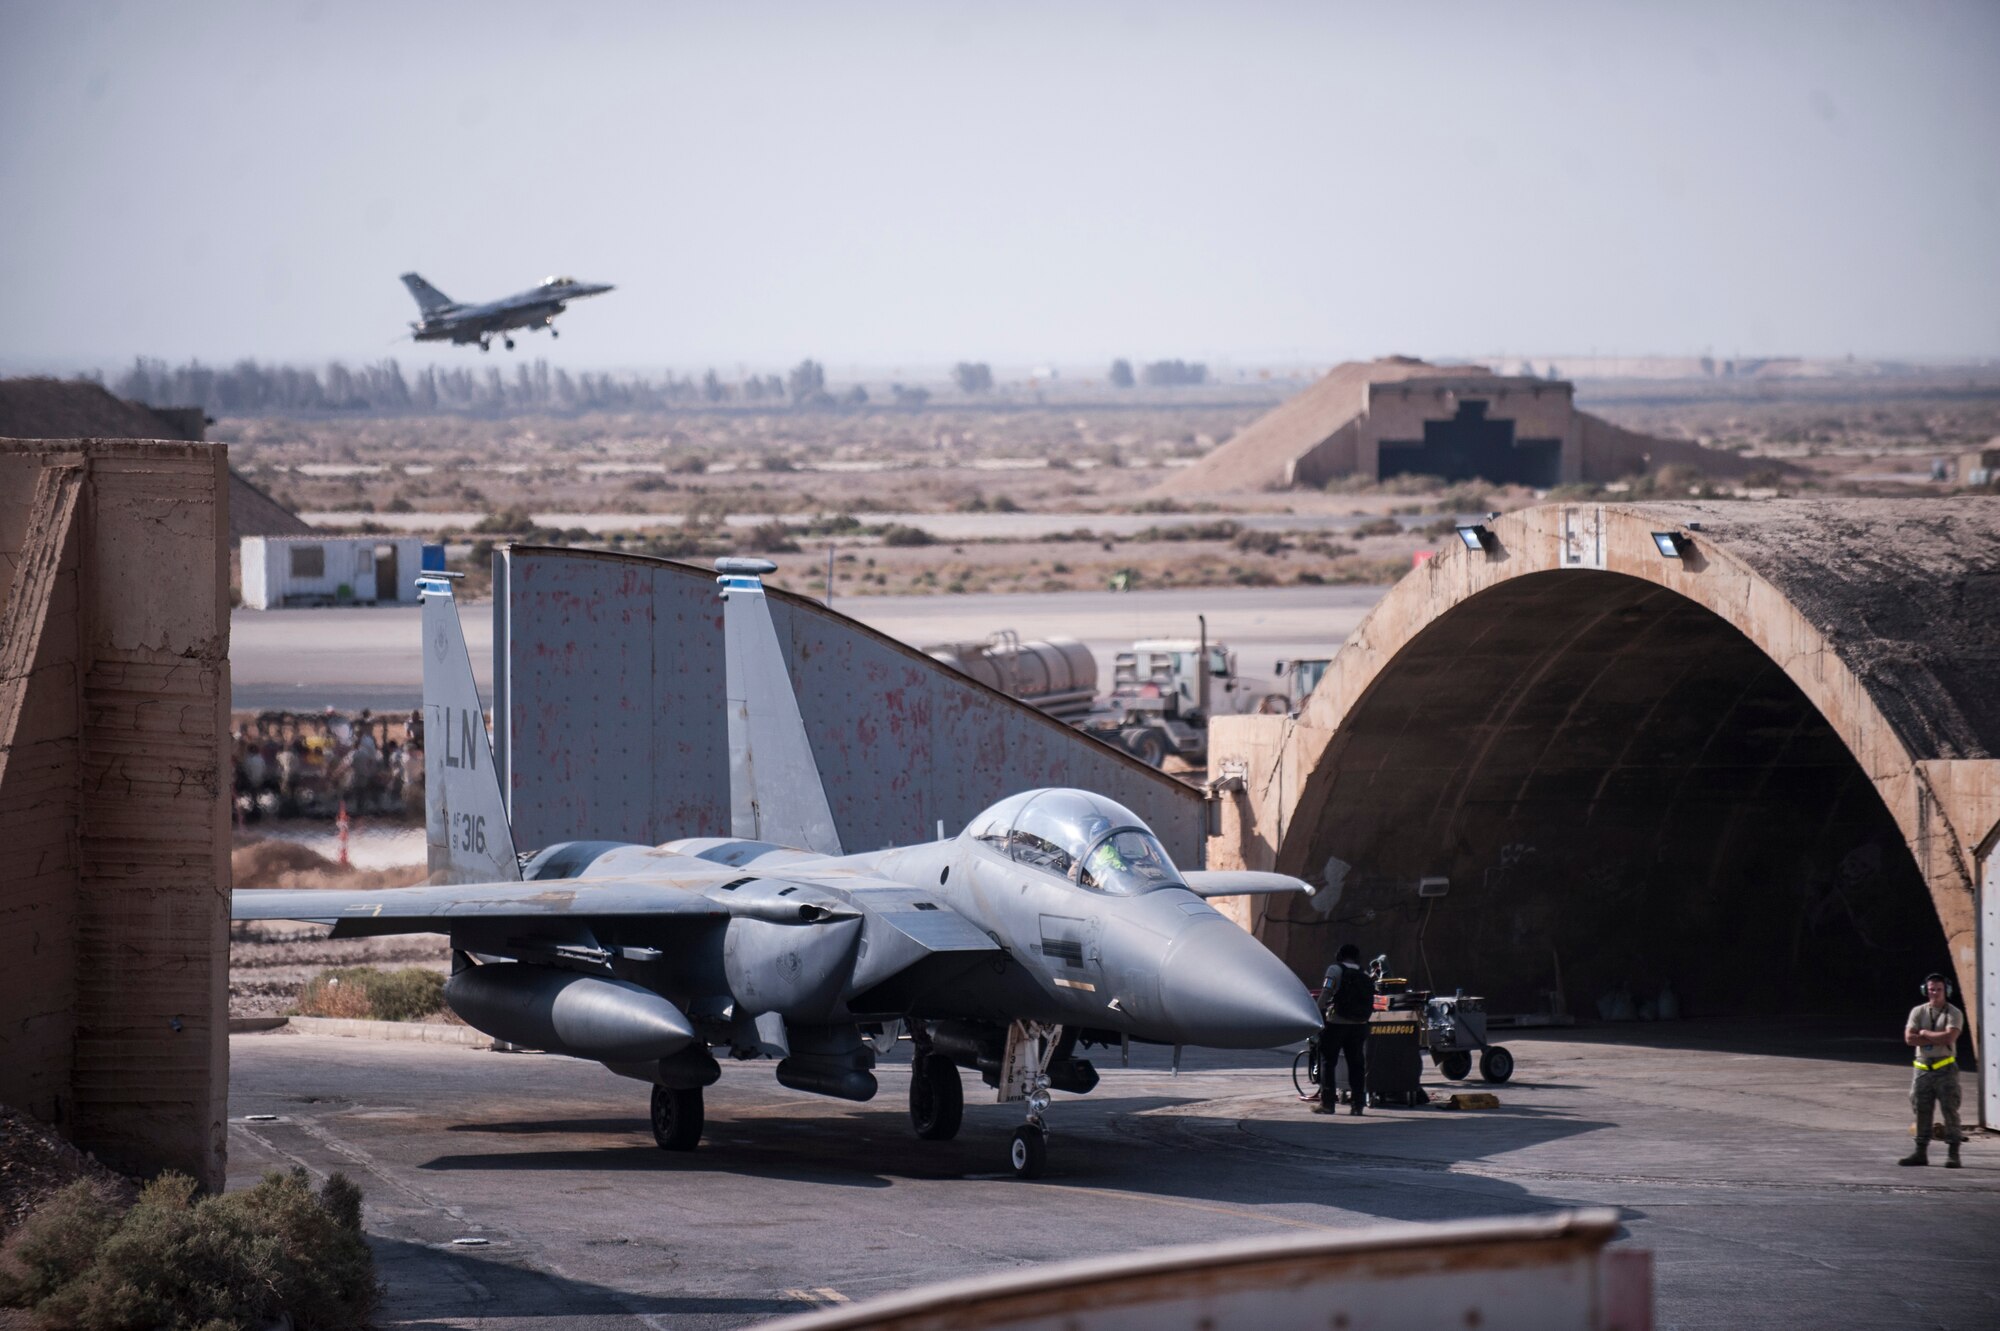 An F-15E Strike Eagle from the 492nd Expeditionary Fighter Squadron is prepared by maintainers assigned to the 332nd Expeditionary Maintenance Squadron prior to takeoff October 9, 2017 in Southwest Asia. During their deployment, the 492nd EFS performed precision ground attacks on Islamic State fighters, equipment, and economic assets, playing a crucial role in the liberation of major cities such as Mosul, Iraq.